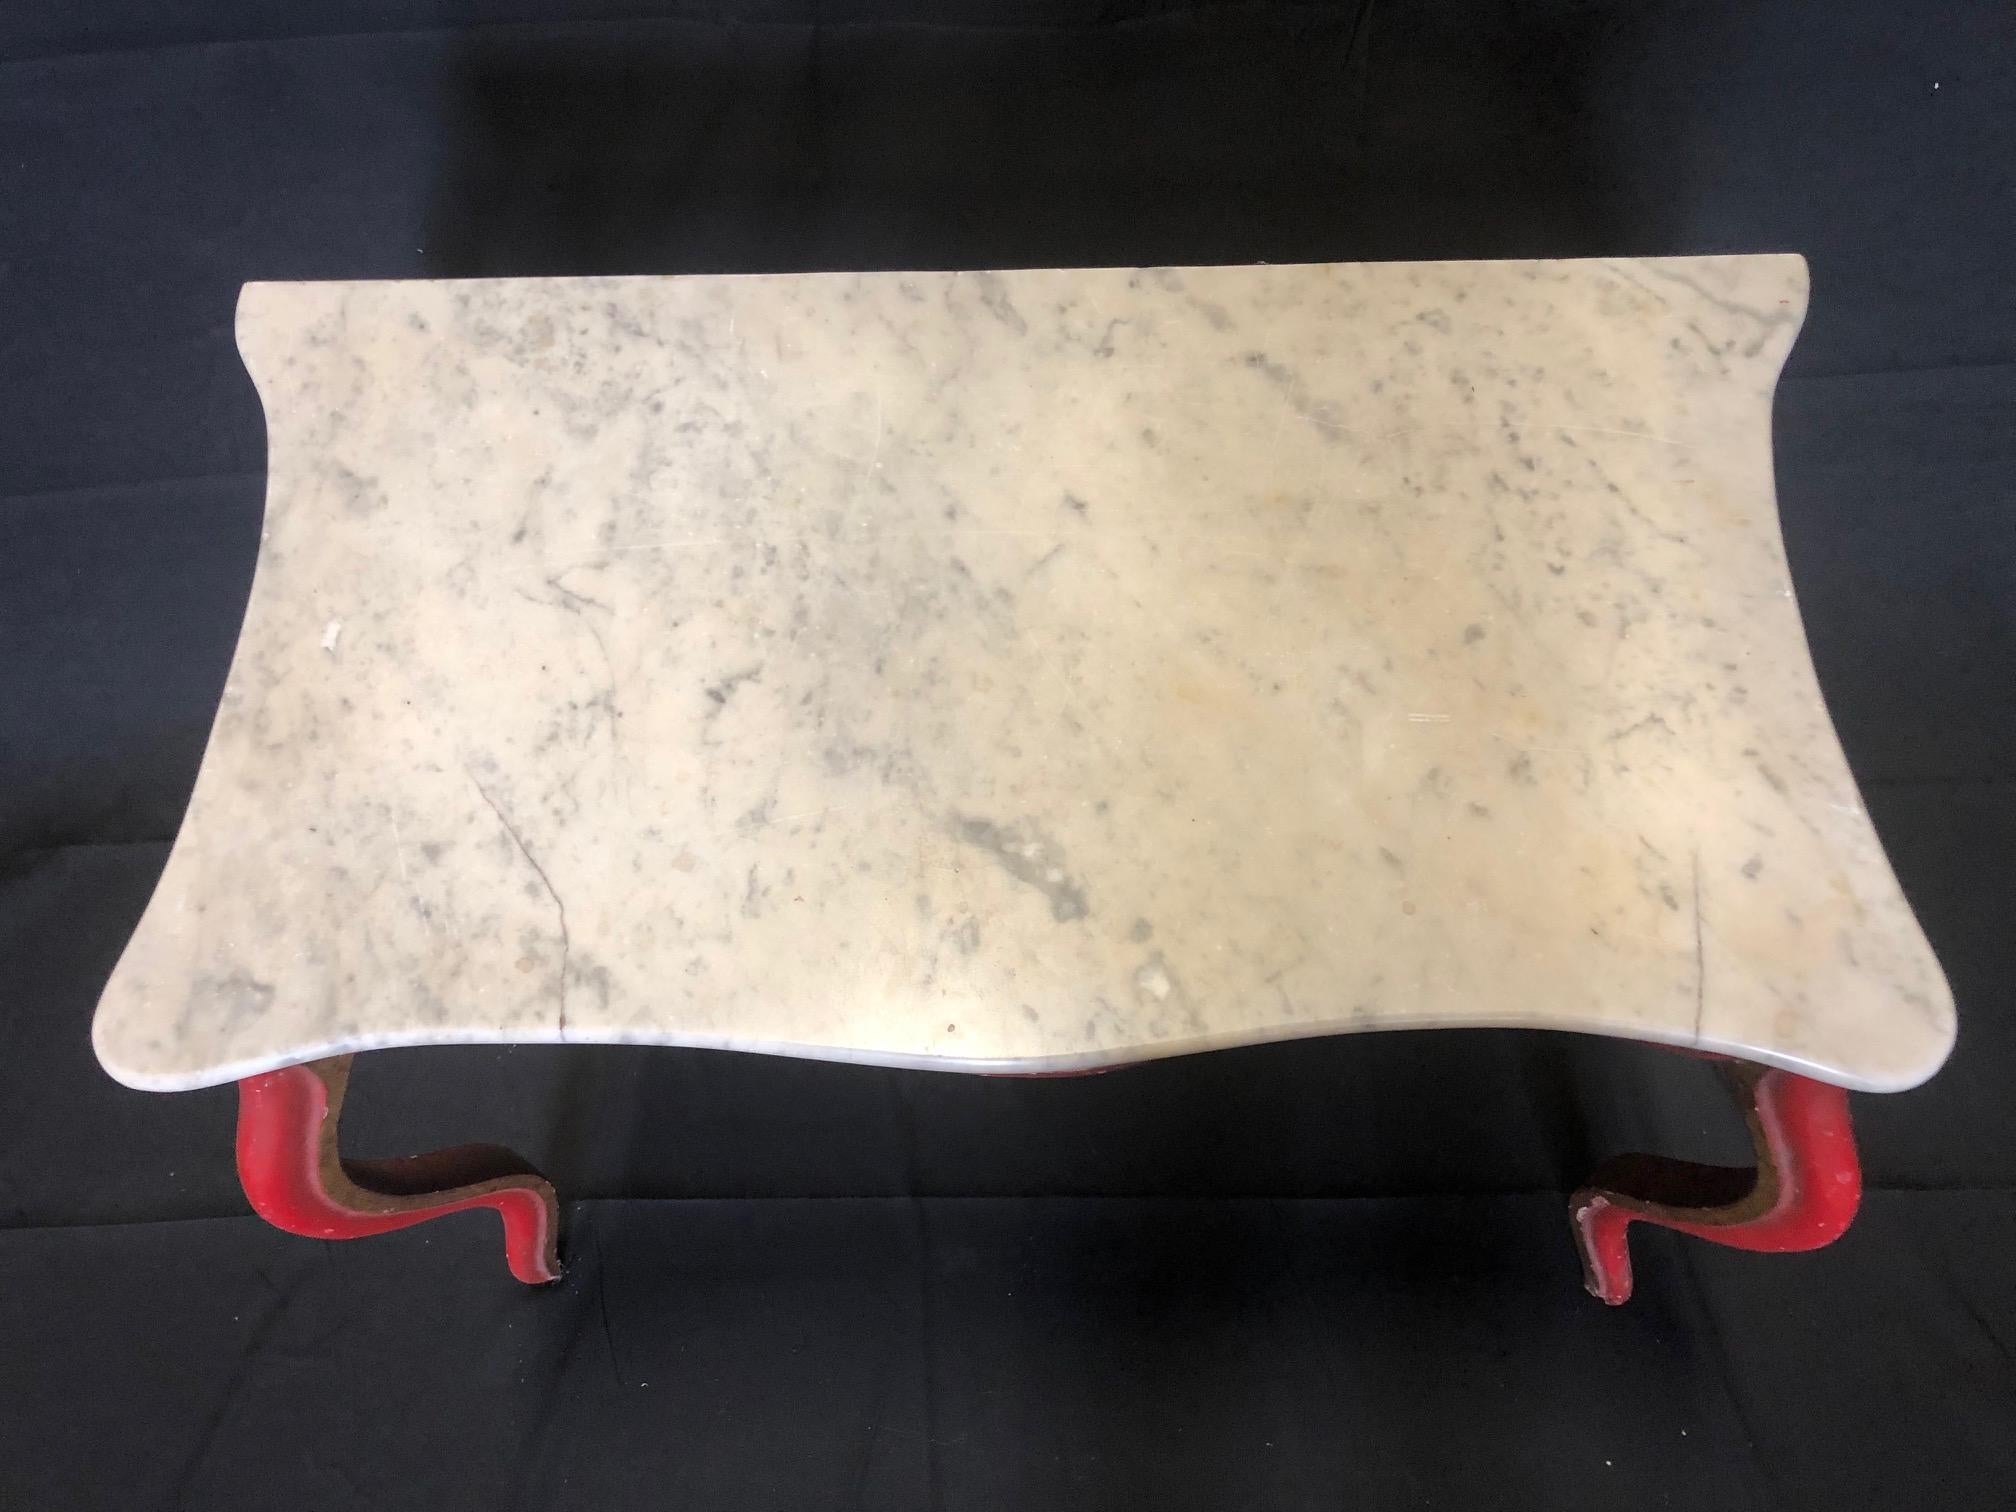 Beautiful French Louis XV Italian Carrara marble-topped hall table or console with original French red color and gold gilt inset.

#5232.